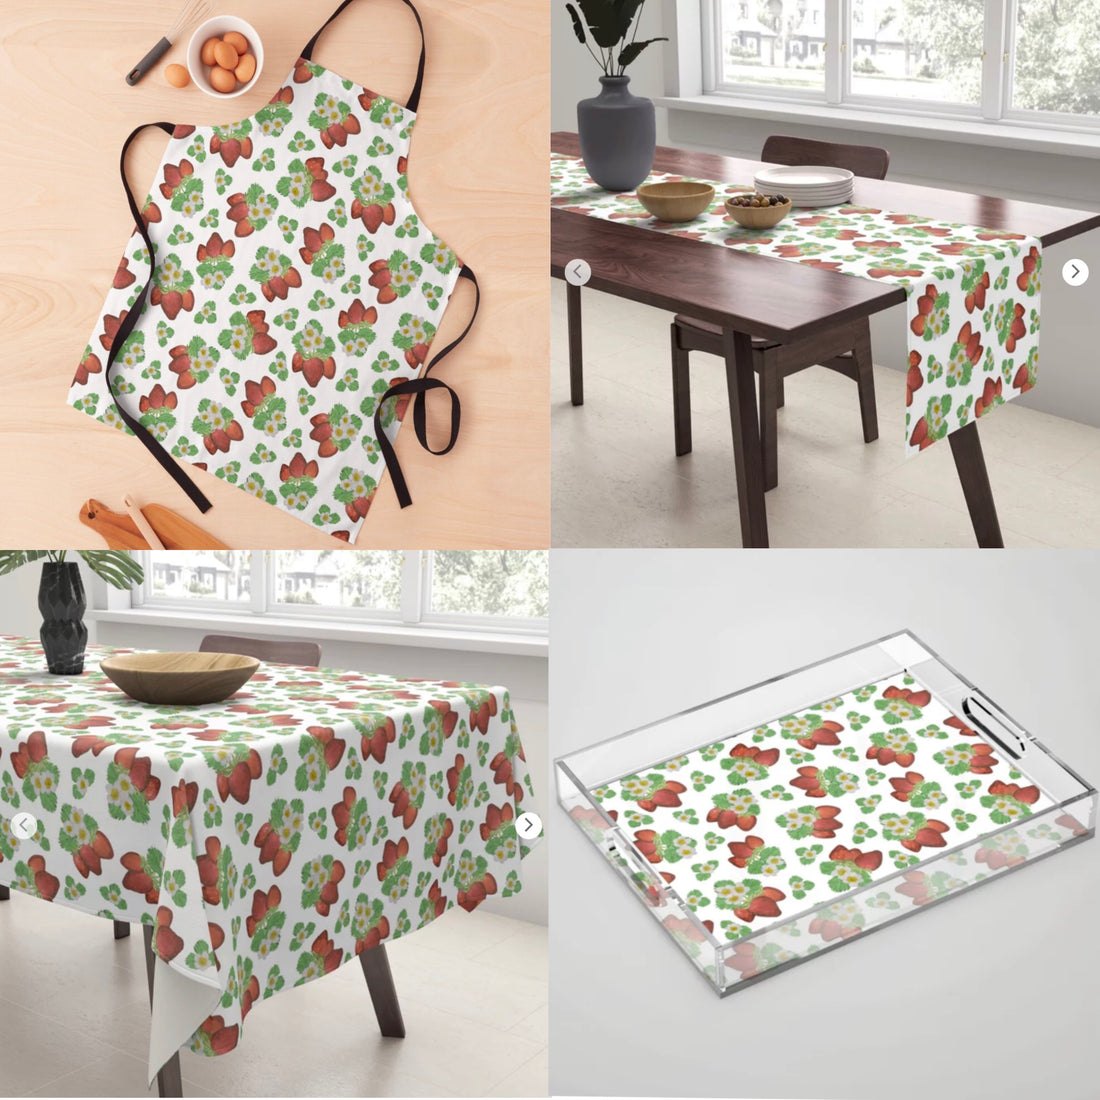 Strawberry Patch -- New Art and Design